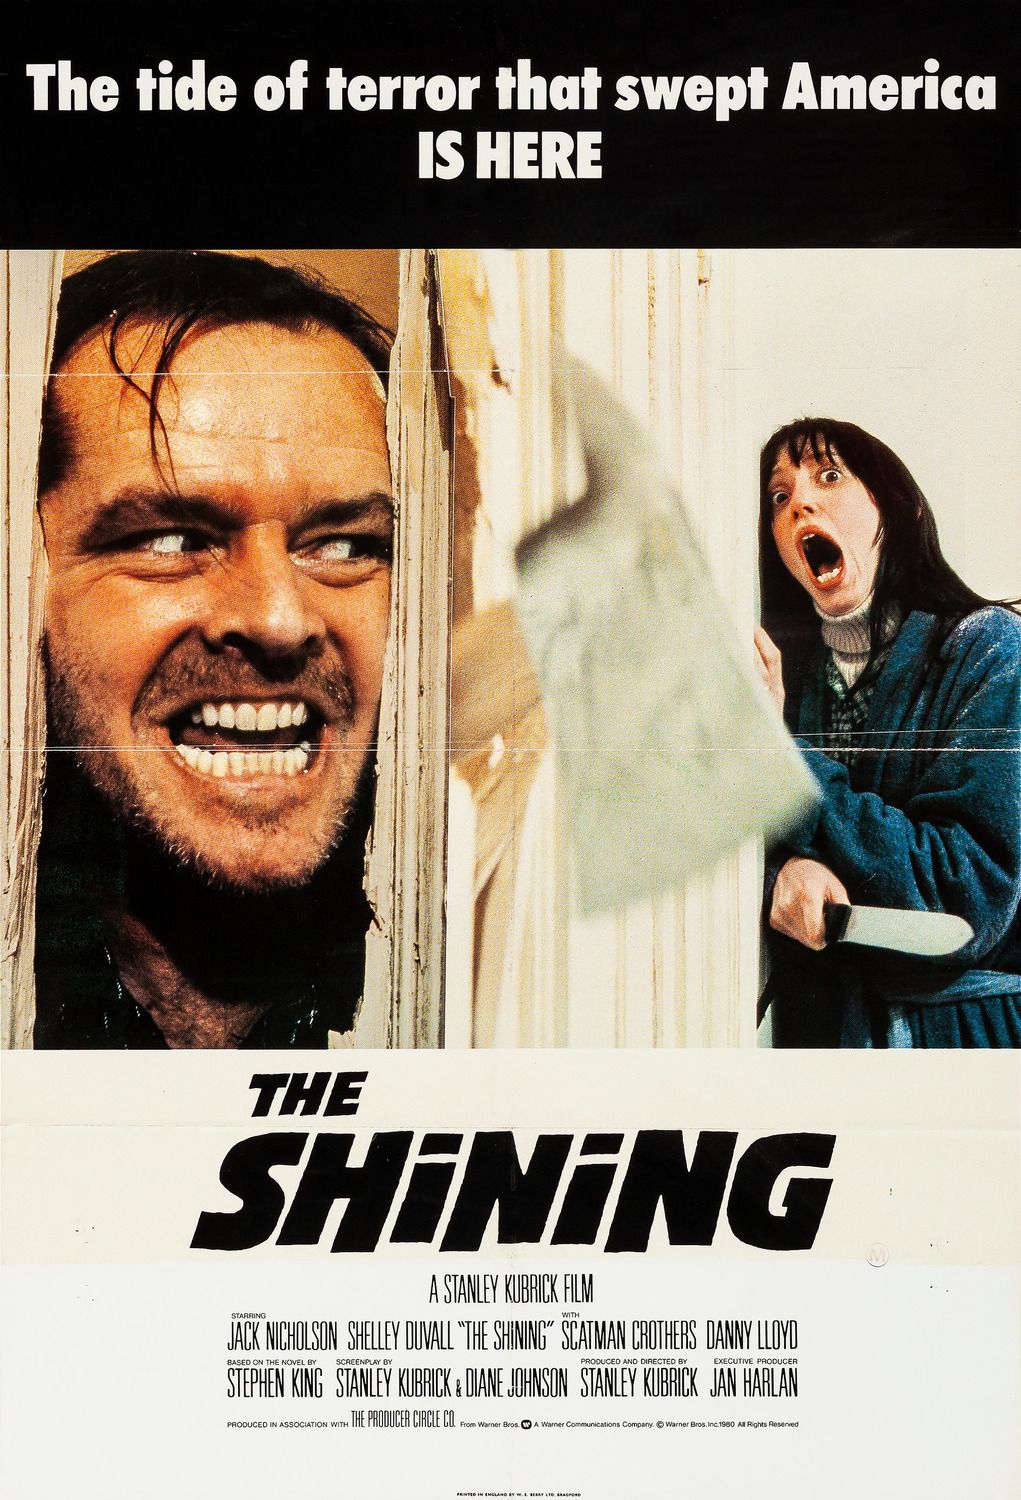 Axe wielded by Jack Nicholson in 'The Shining' is up for auction